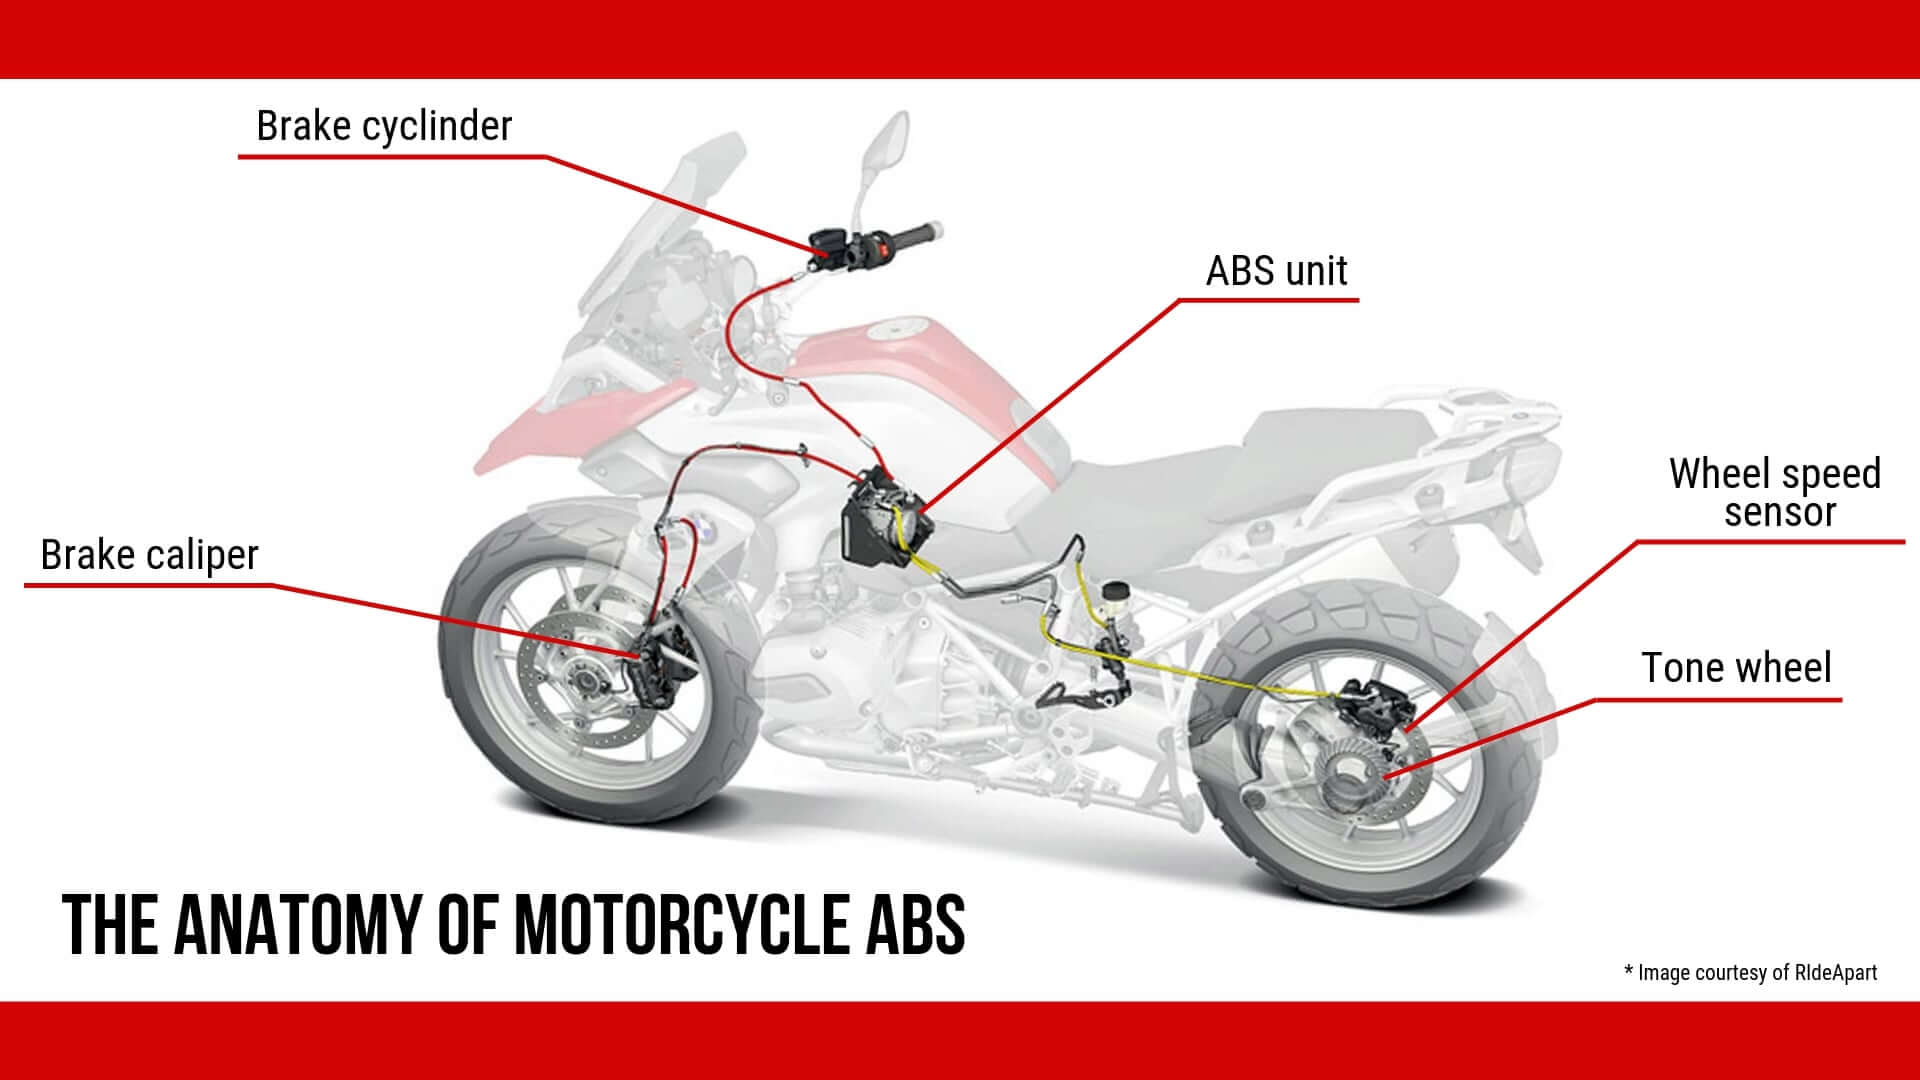 An x-ray of a motorcycle showing the different ABS component.